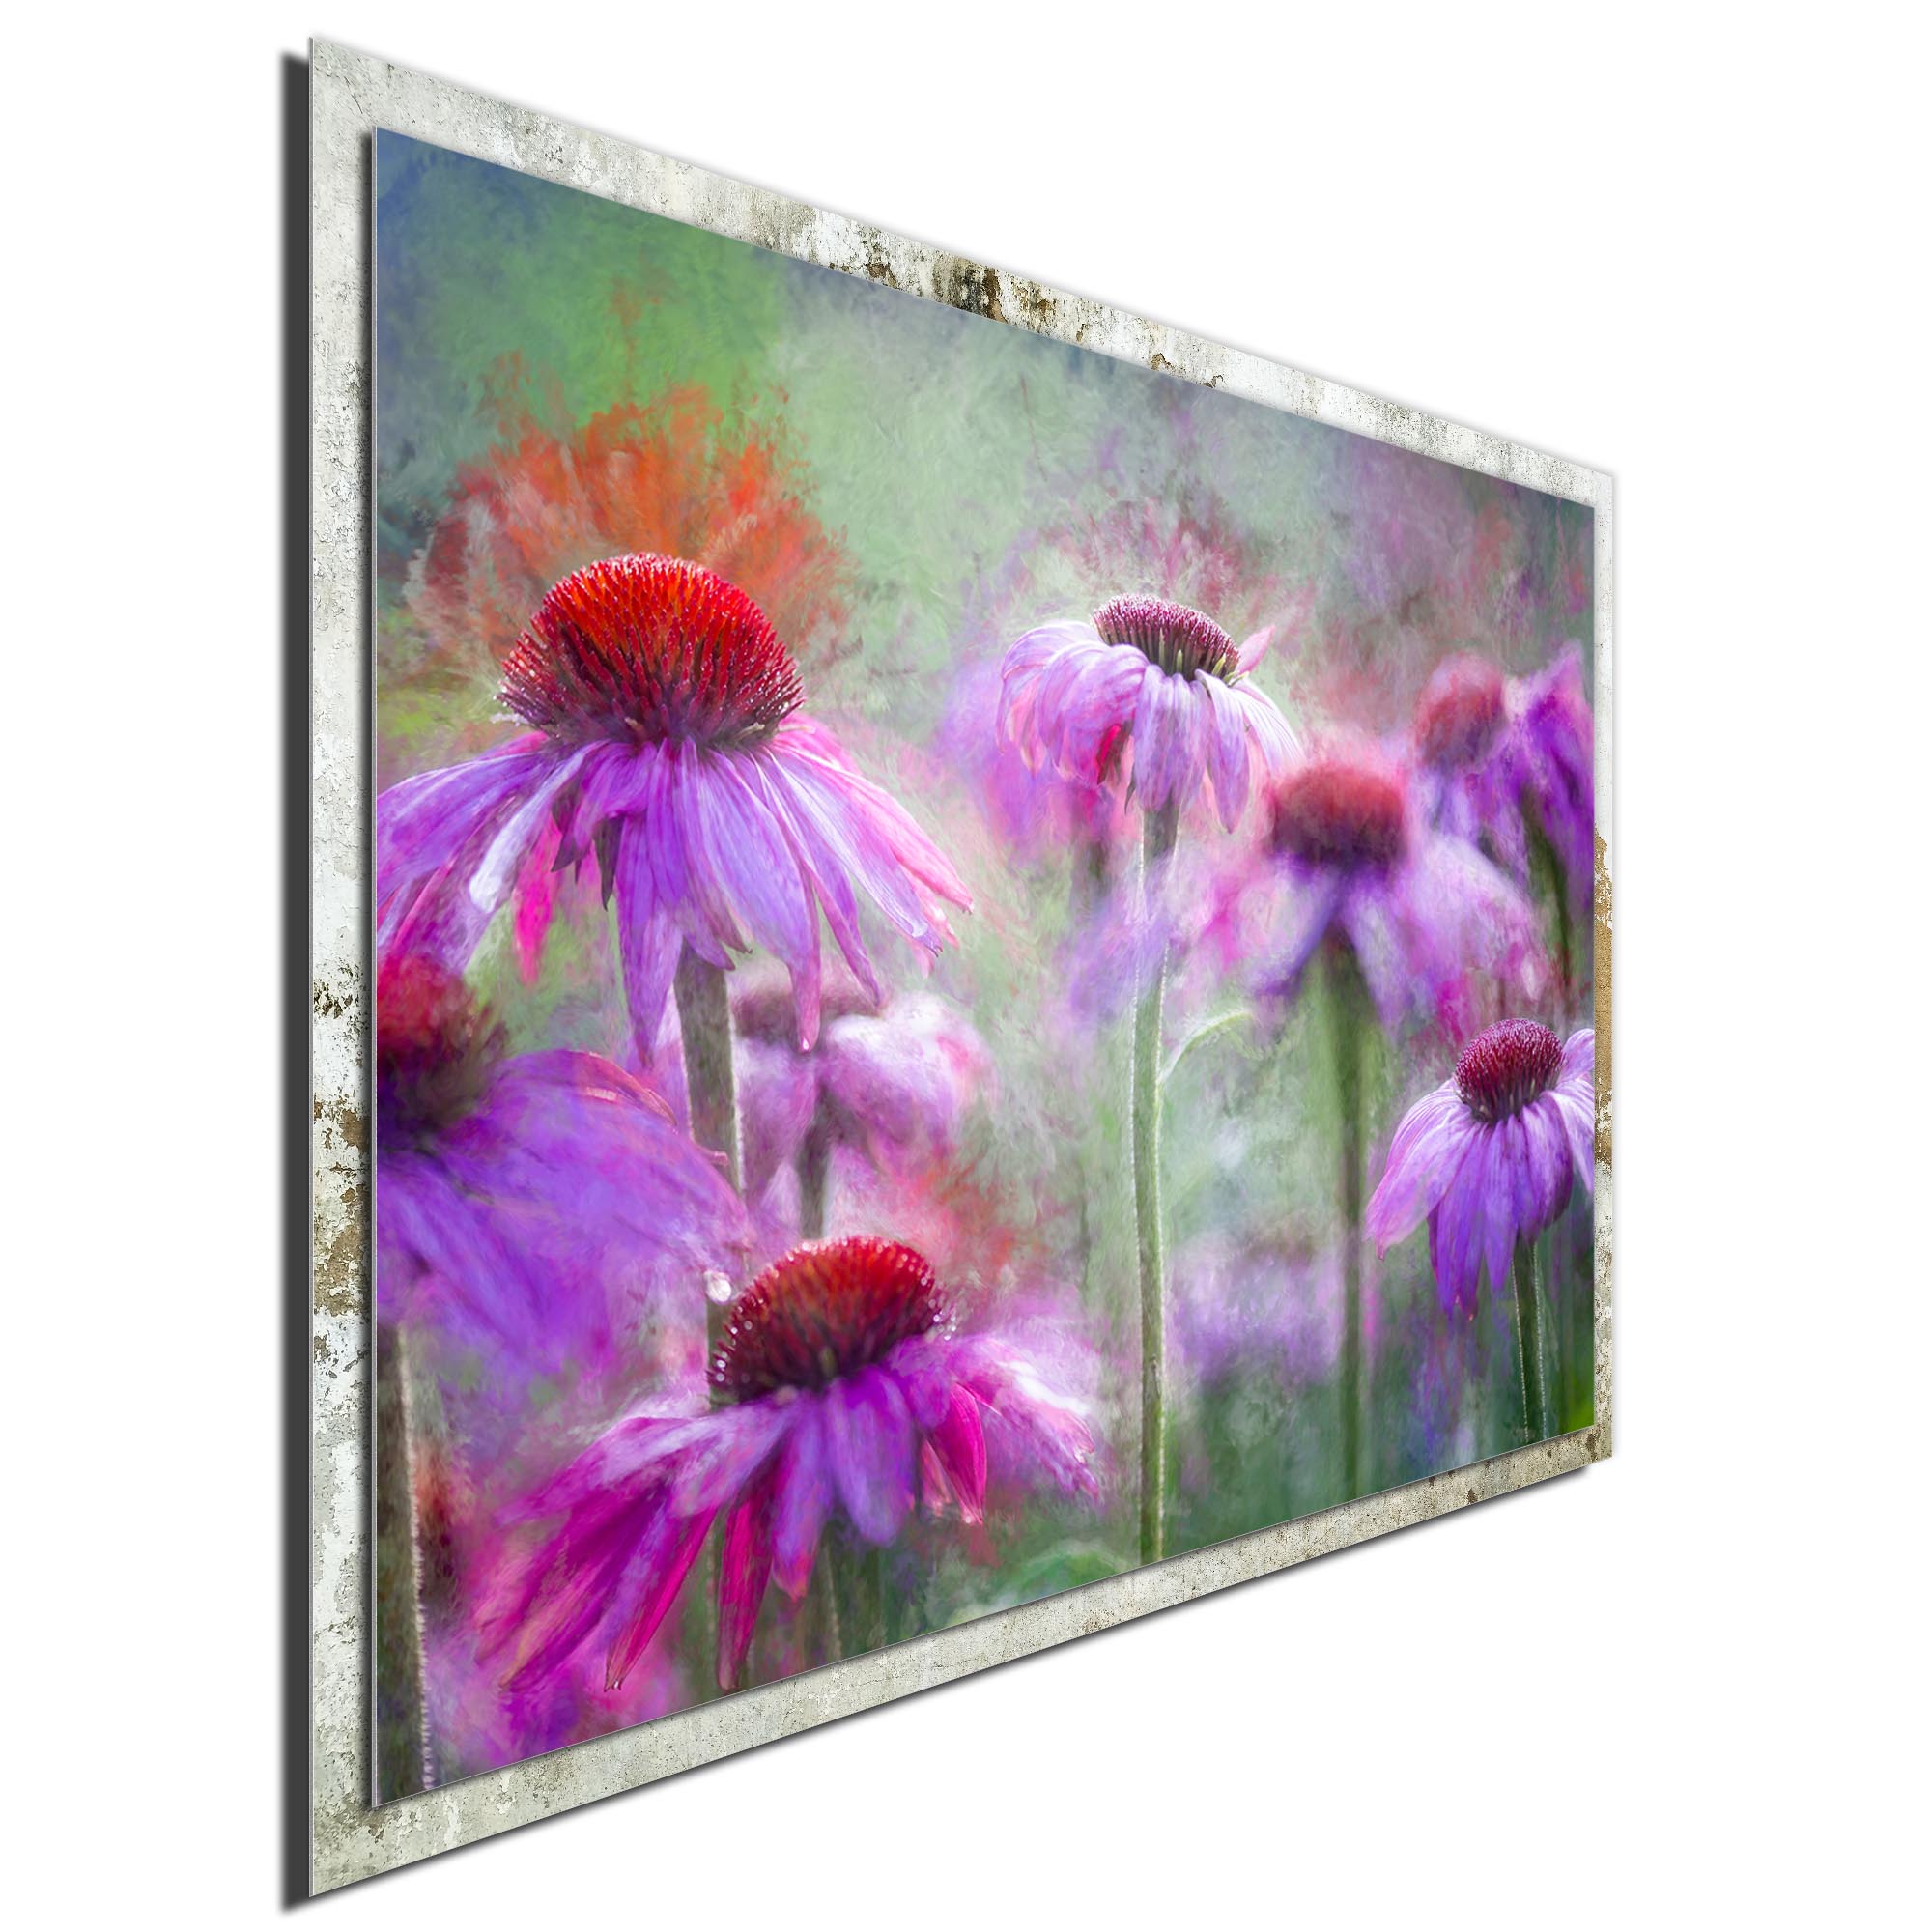 Cone Flowers in the Morning Light by Ulrike Eisenmann - Modern Farmhouse Floral on Metal - Image 2